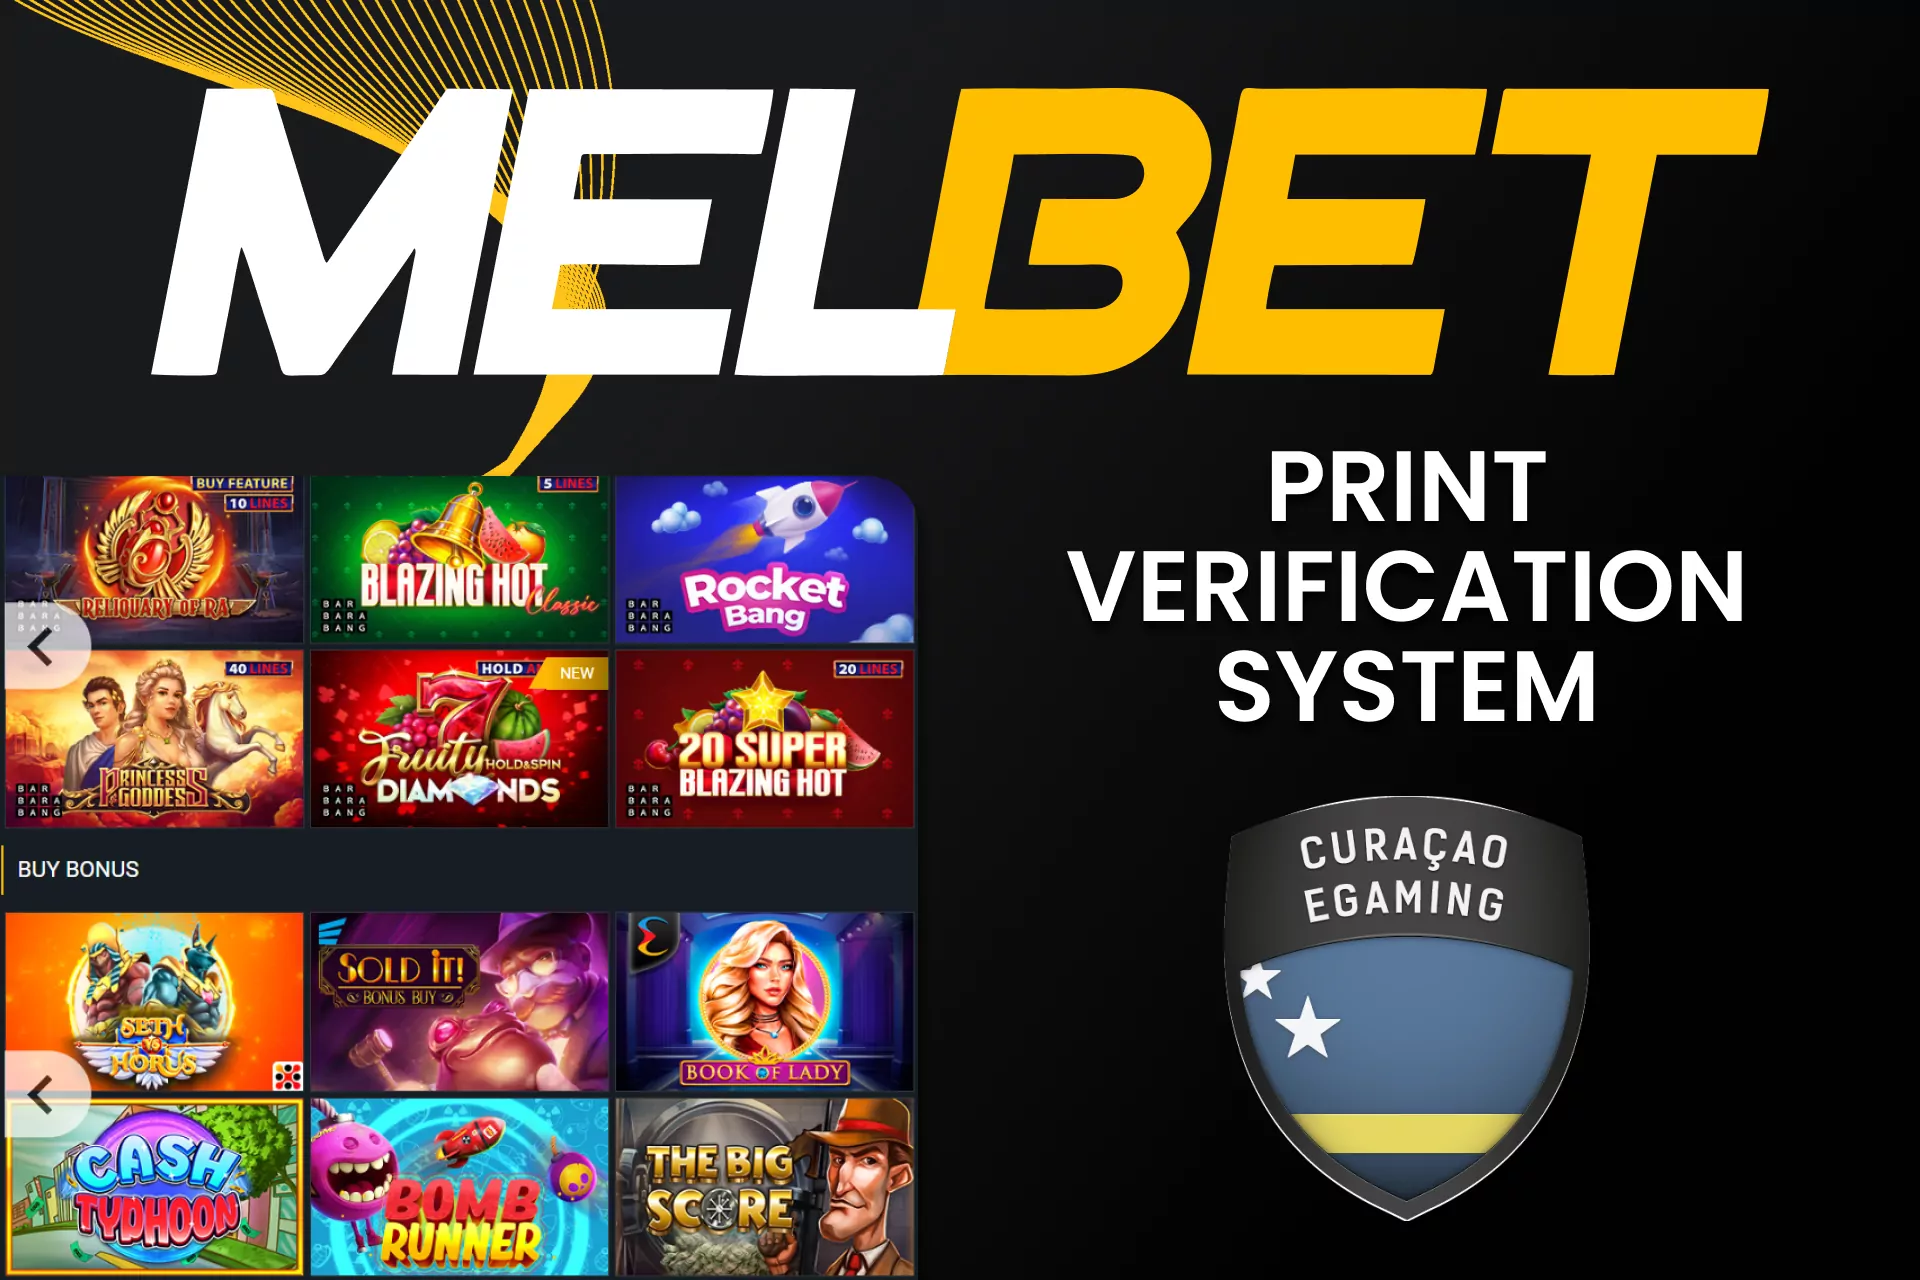 The content on the Melbet website is owned by Curacao.